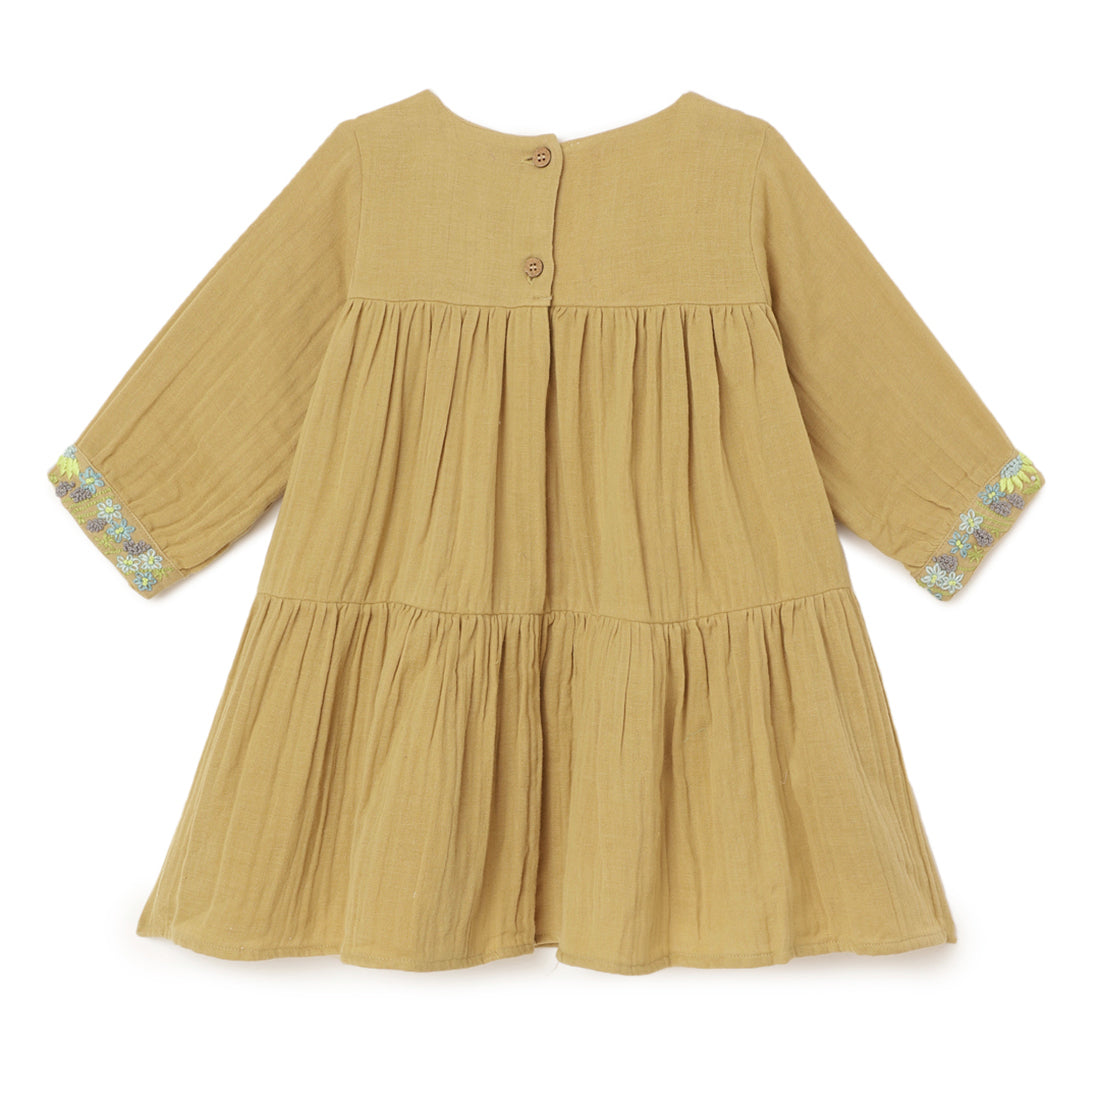 Girls Embroidered Cotton Dress Yellow - 1 yr to 8 yrs - Back